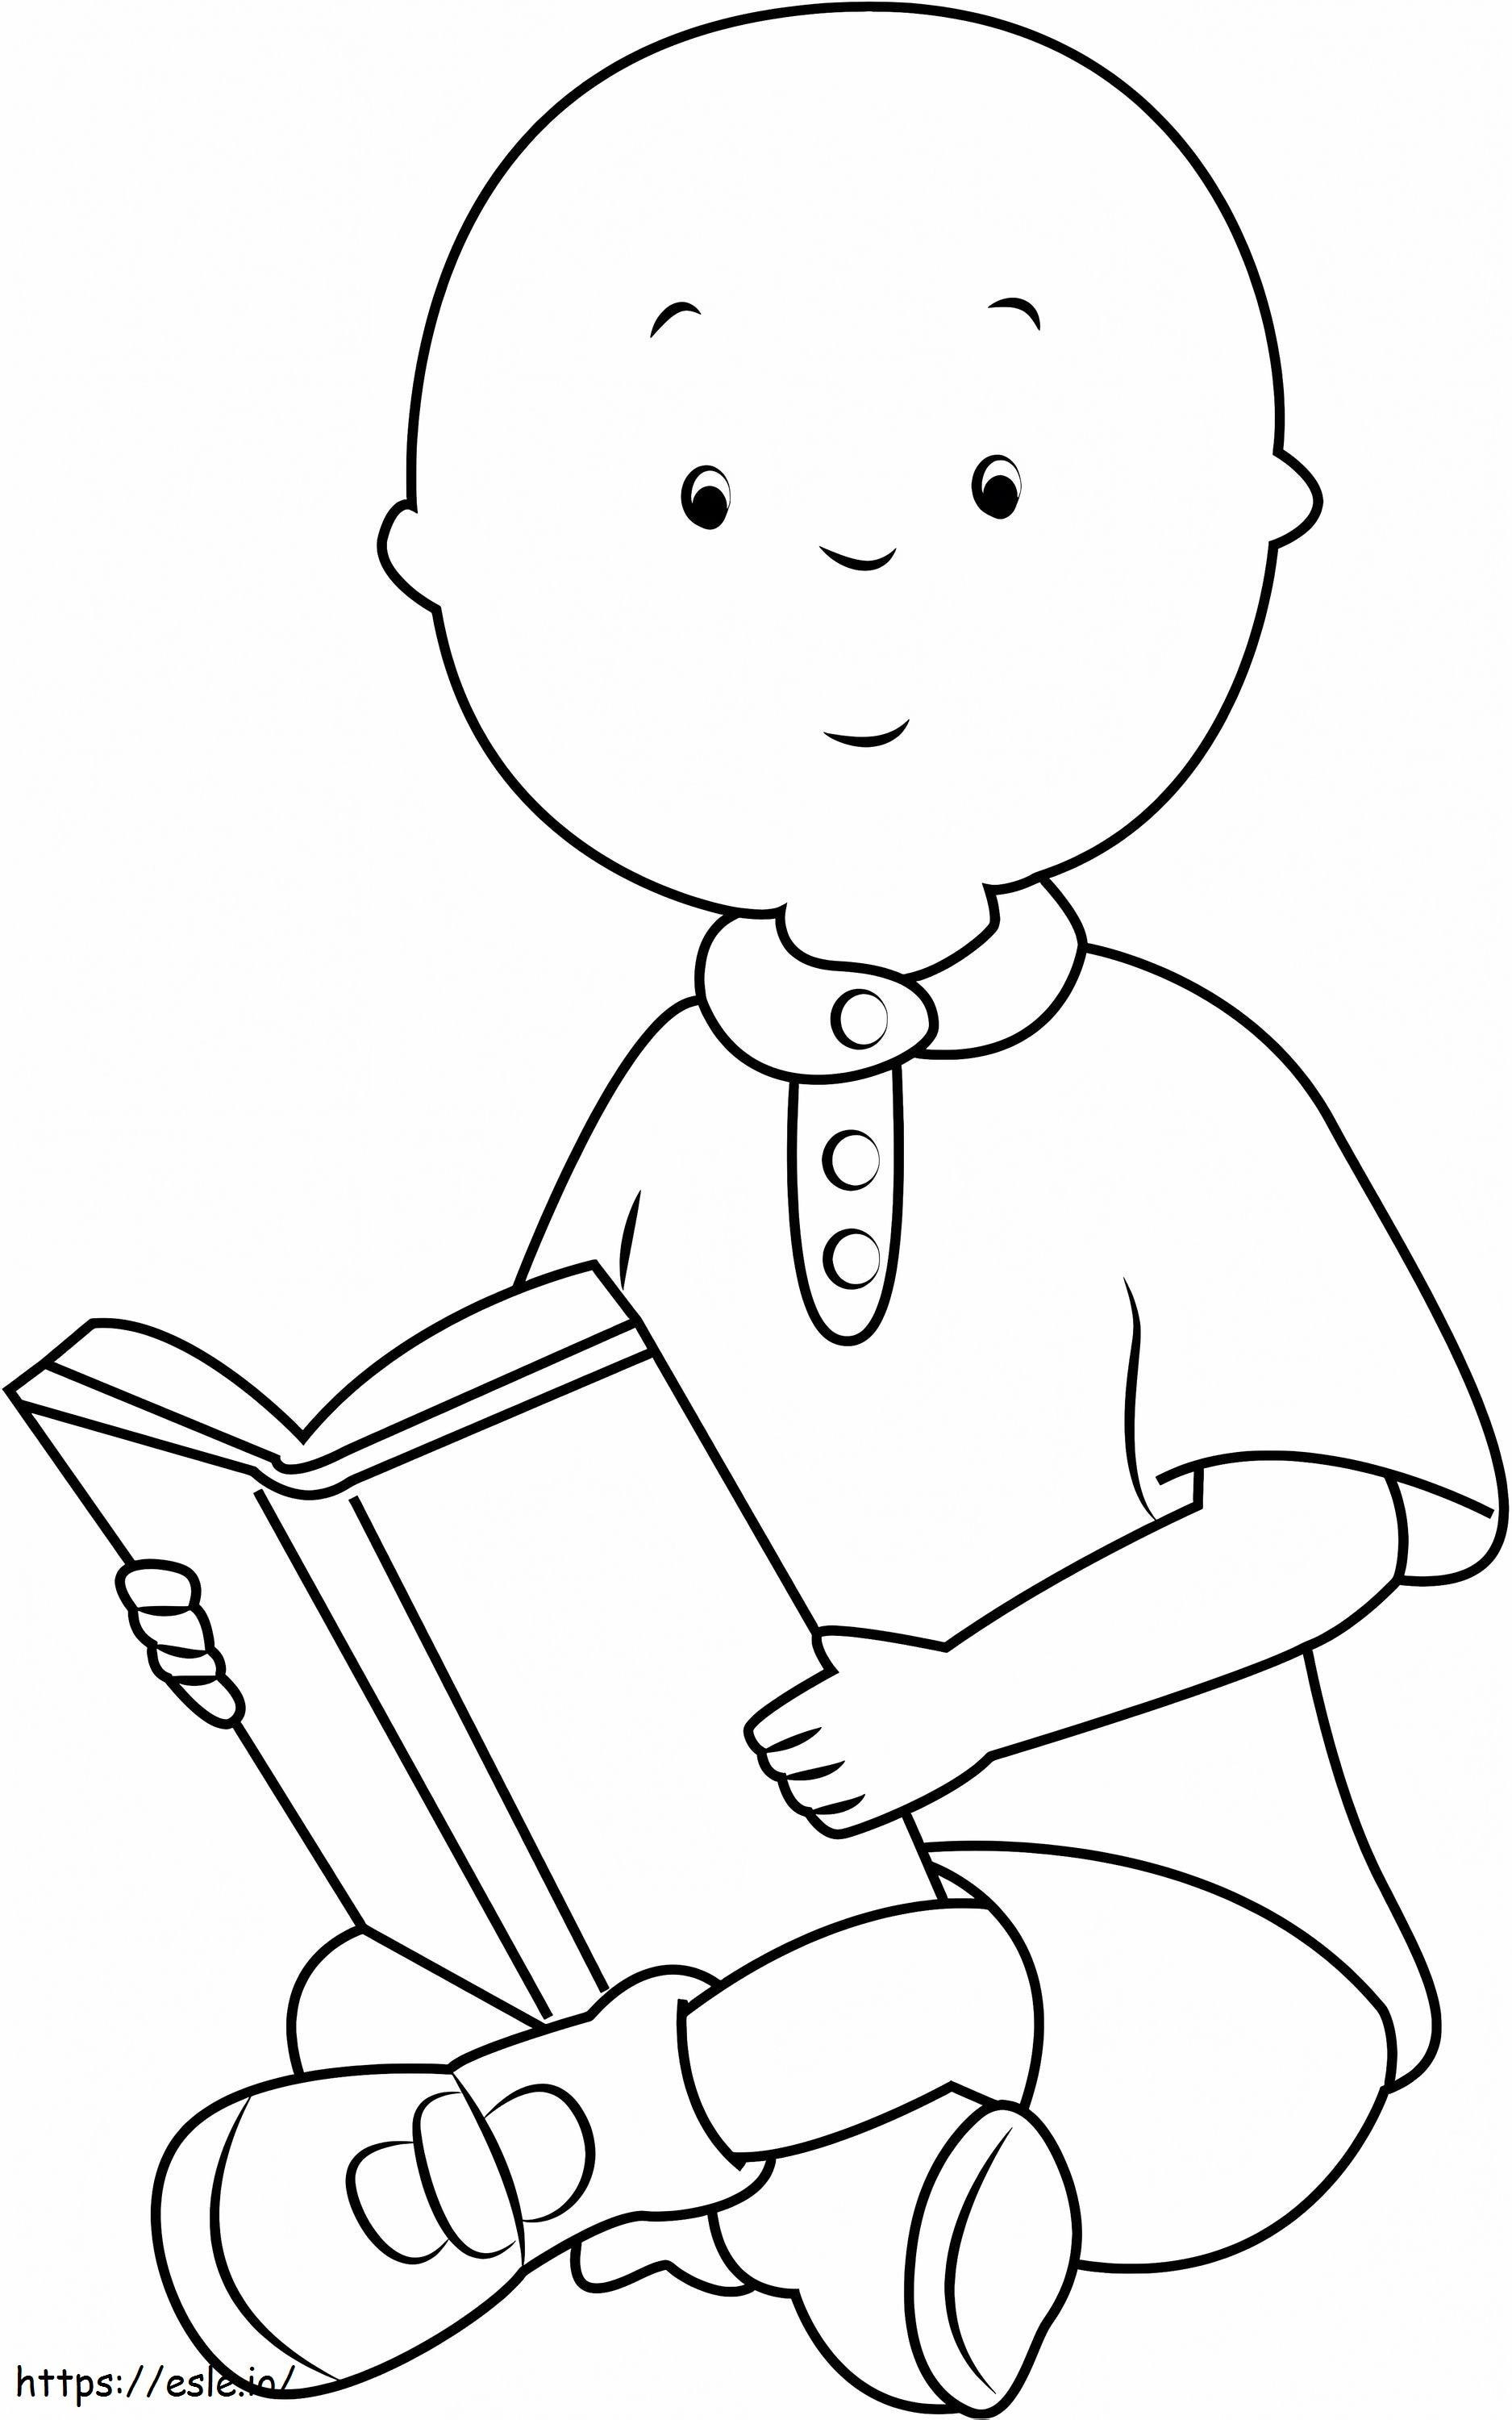 1530756382 Caillou Reading A Booka4 coloring page